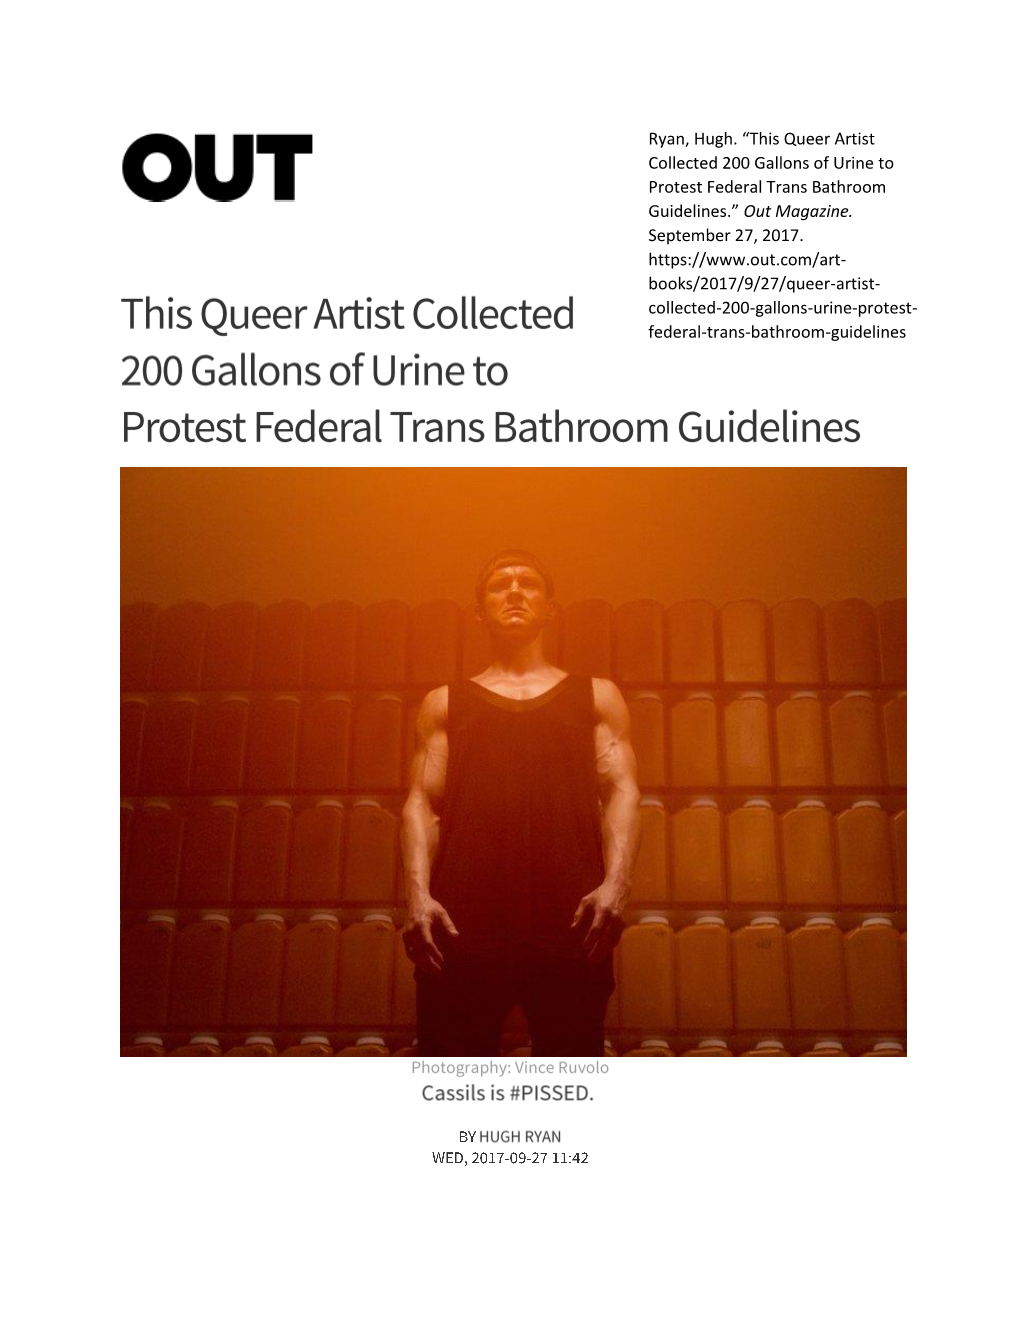 This Queer Artist Collected 200 Gallons of Urine to Protest Federal Trans Bathroom Guidelines.” out Magazine